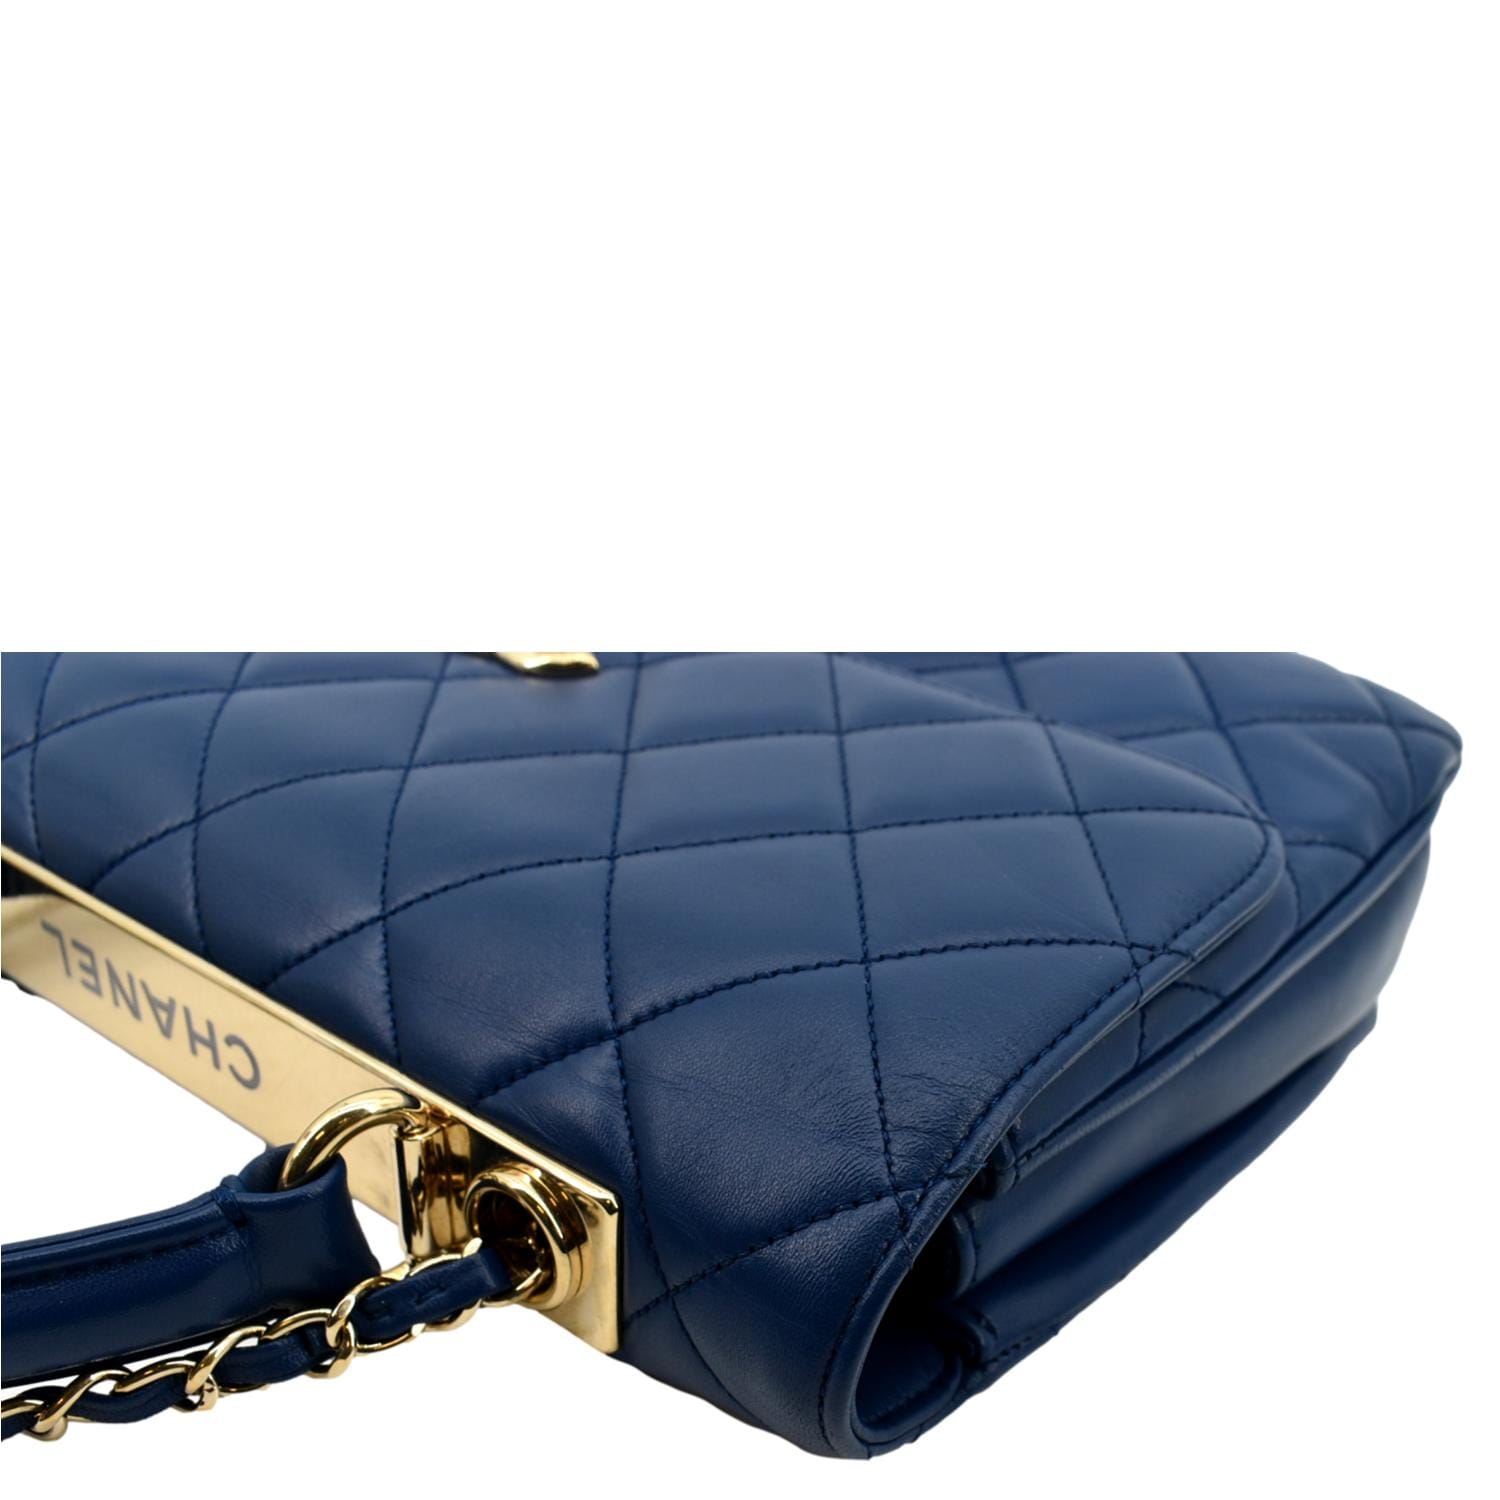 chanel bag in blue 3